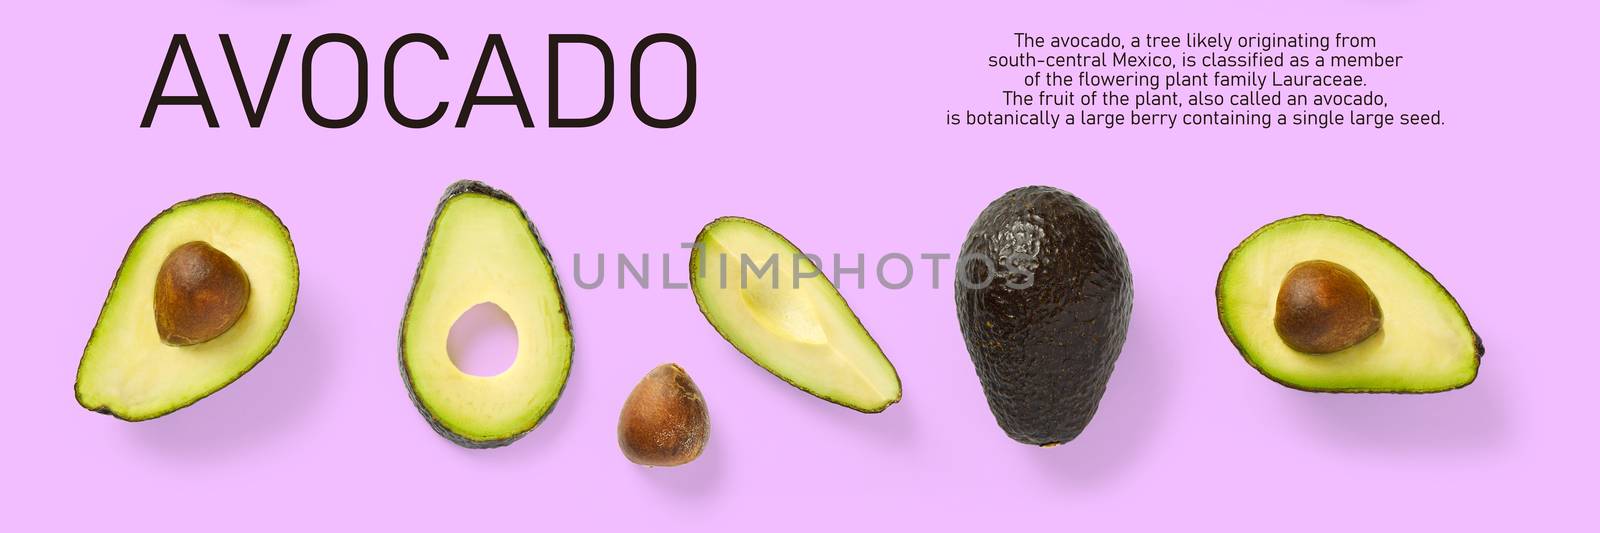 Modern creative avocado collage with simple text on solid color background. Avocado slices creative layout on pink background. Flat lay, Food concept by PhotoTime